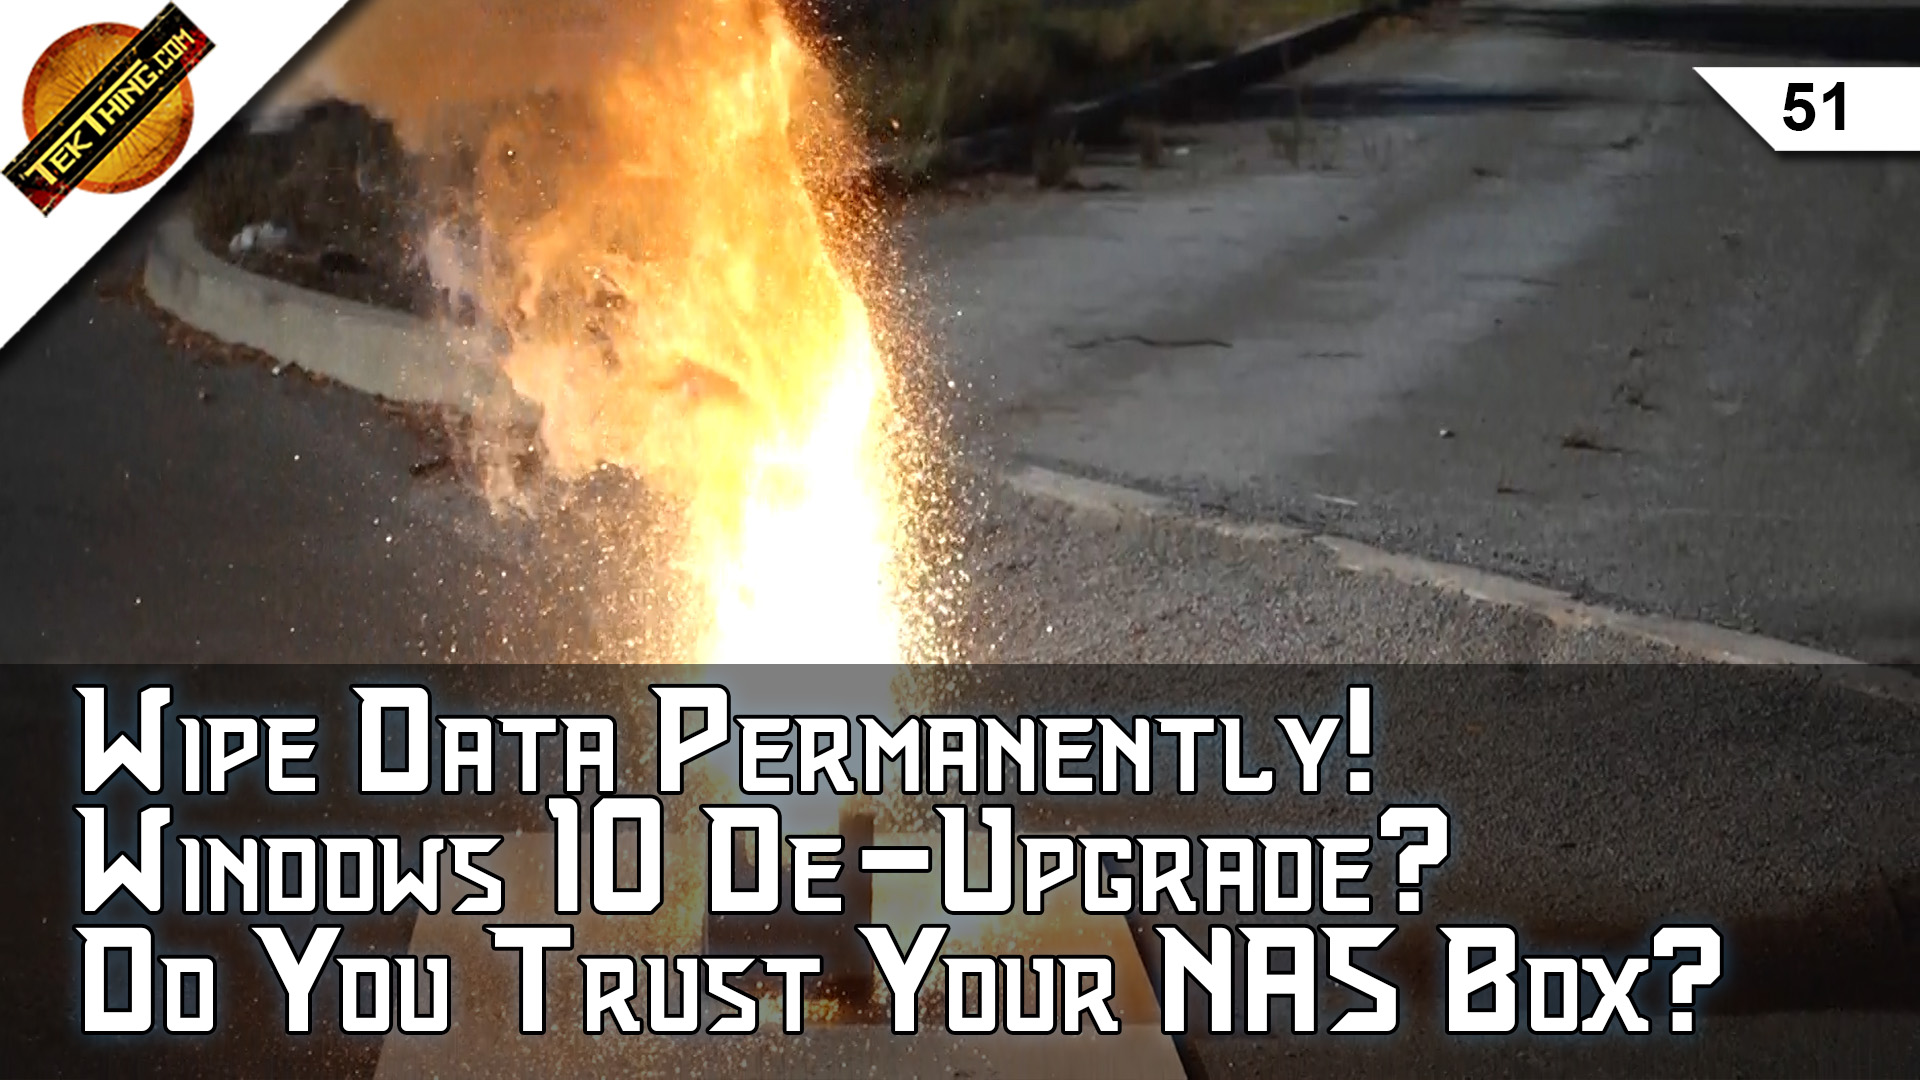 TekThing 51: Thermite, Acid, &amp; Hammers Make Data Gone Forever! Do You Trust Your NAS? De-Upgrade Windows 10...